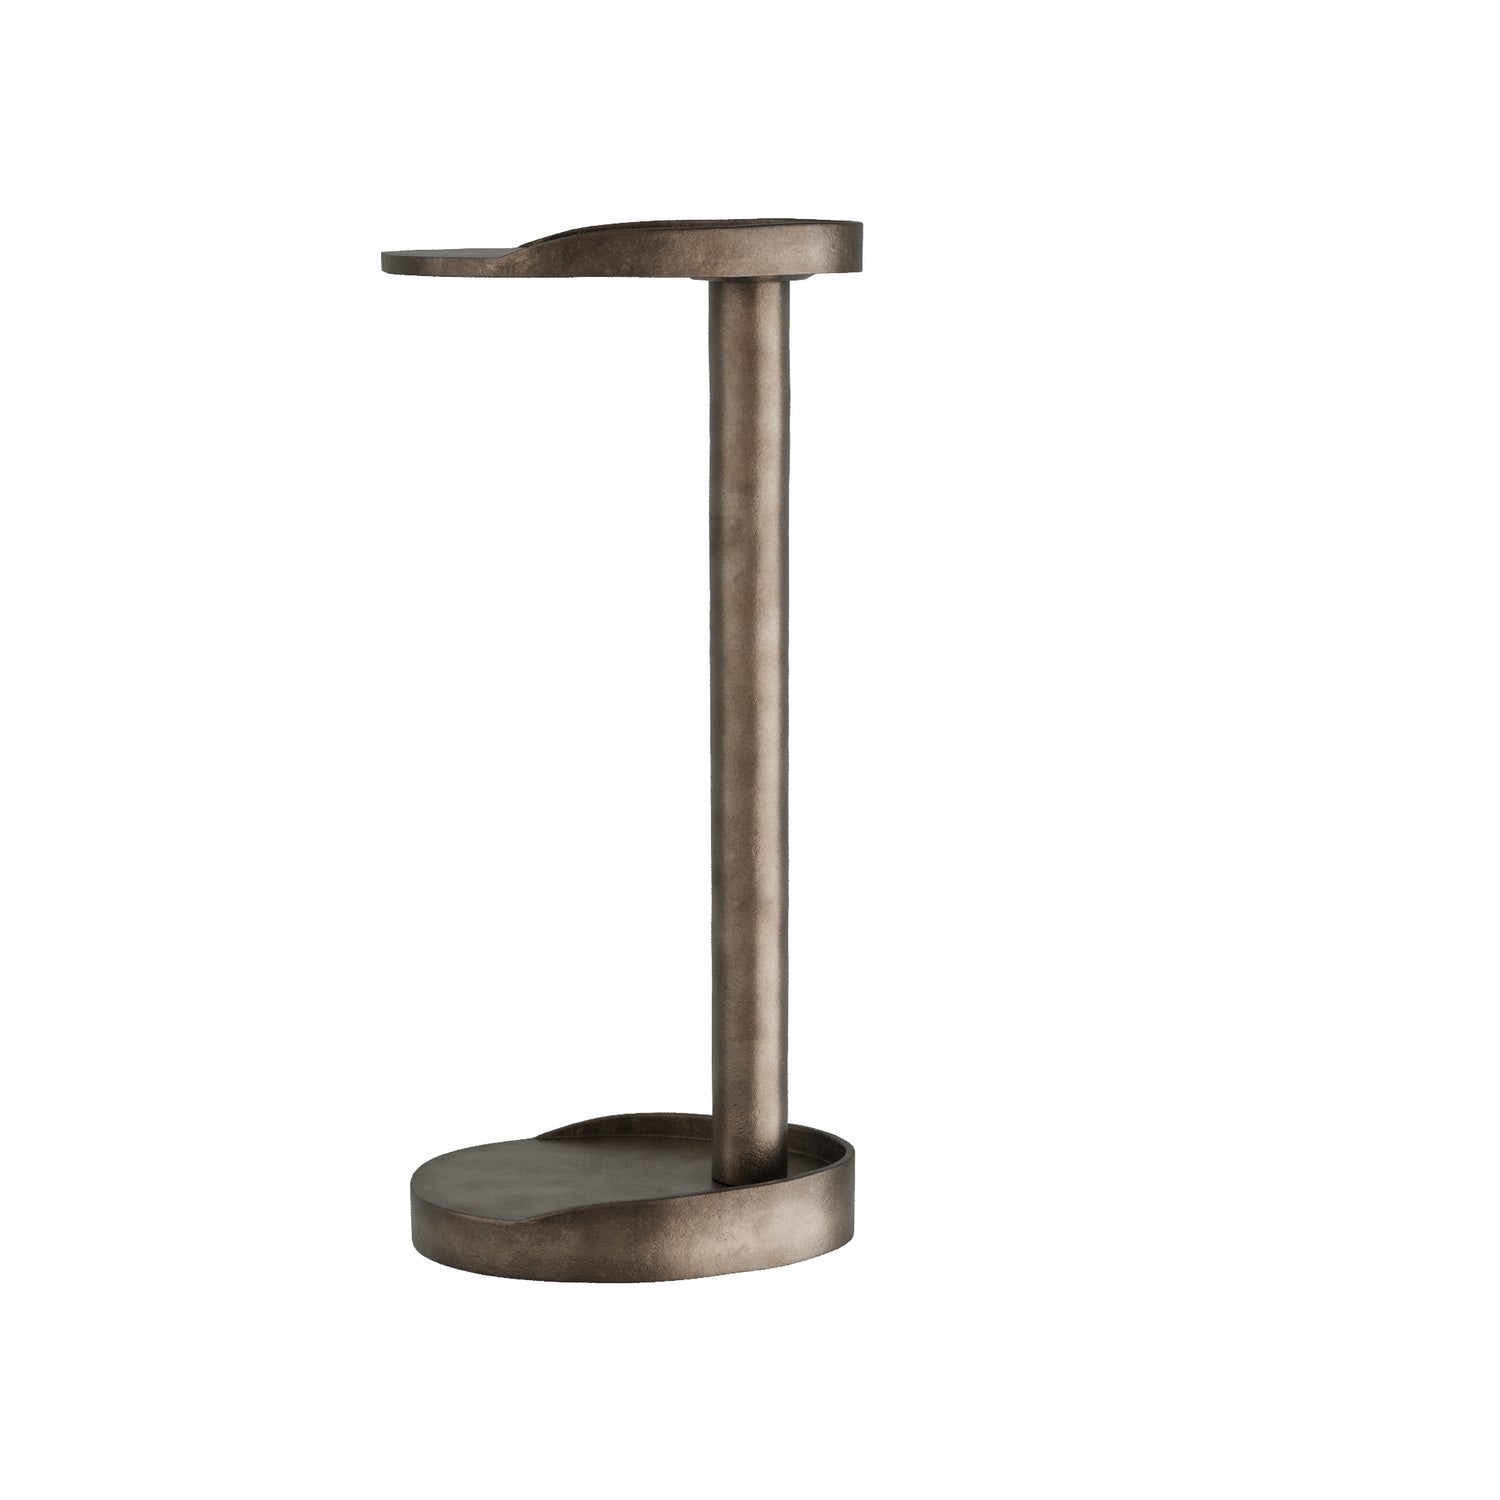 Drink Table from the Slade collection in Graphite finish